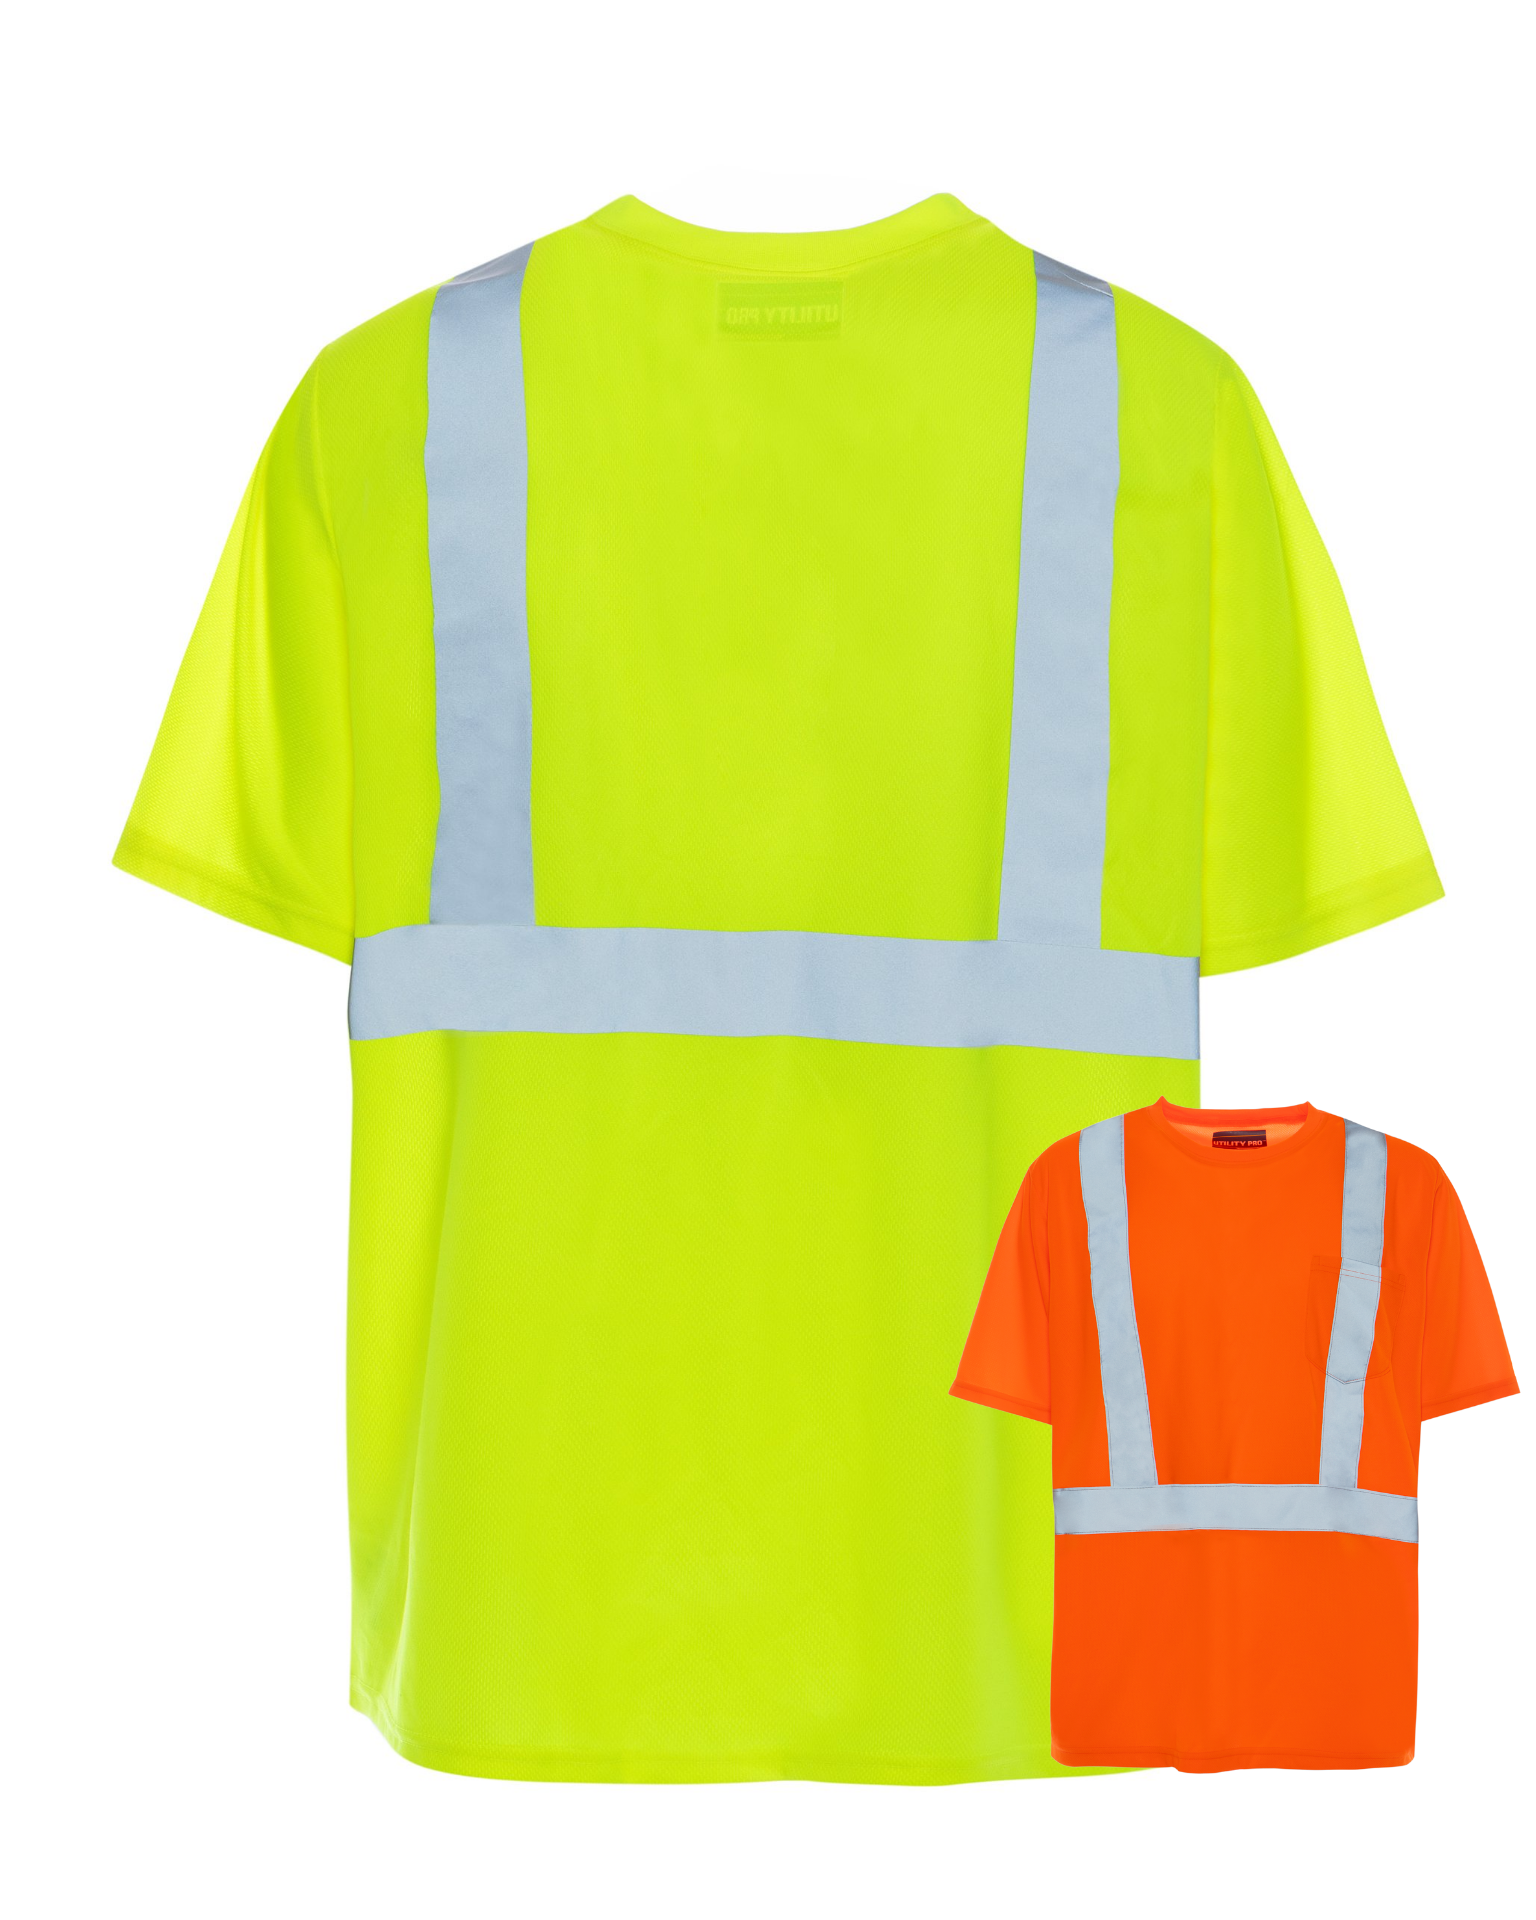 ANSI Class 2 High Visibility breathable fabric liquid and stain repellent short sleeve t-shirt by Utility Pro